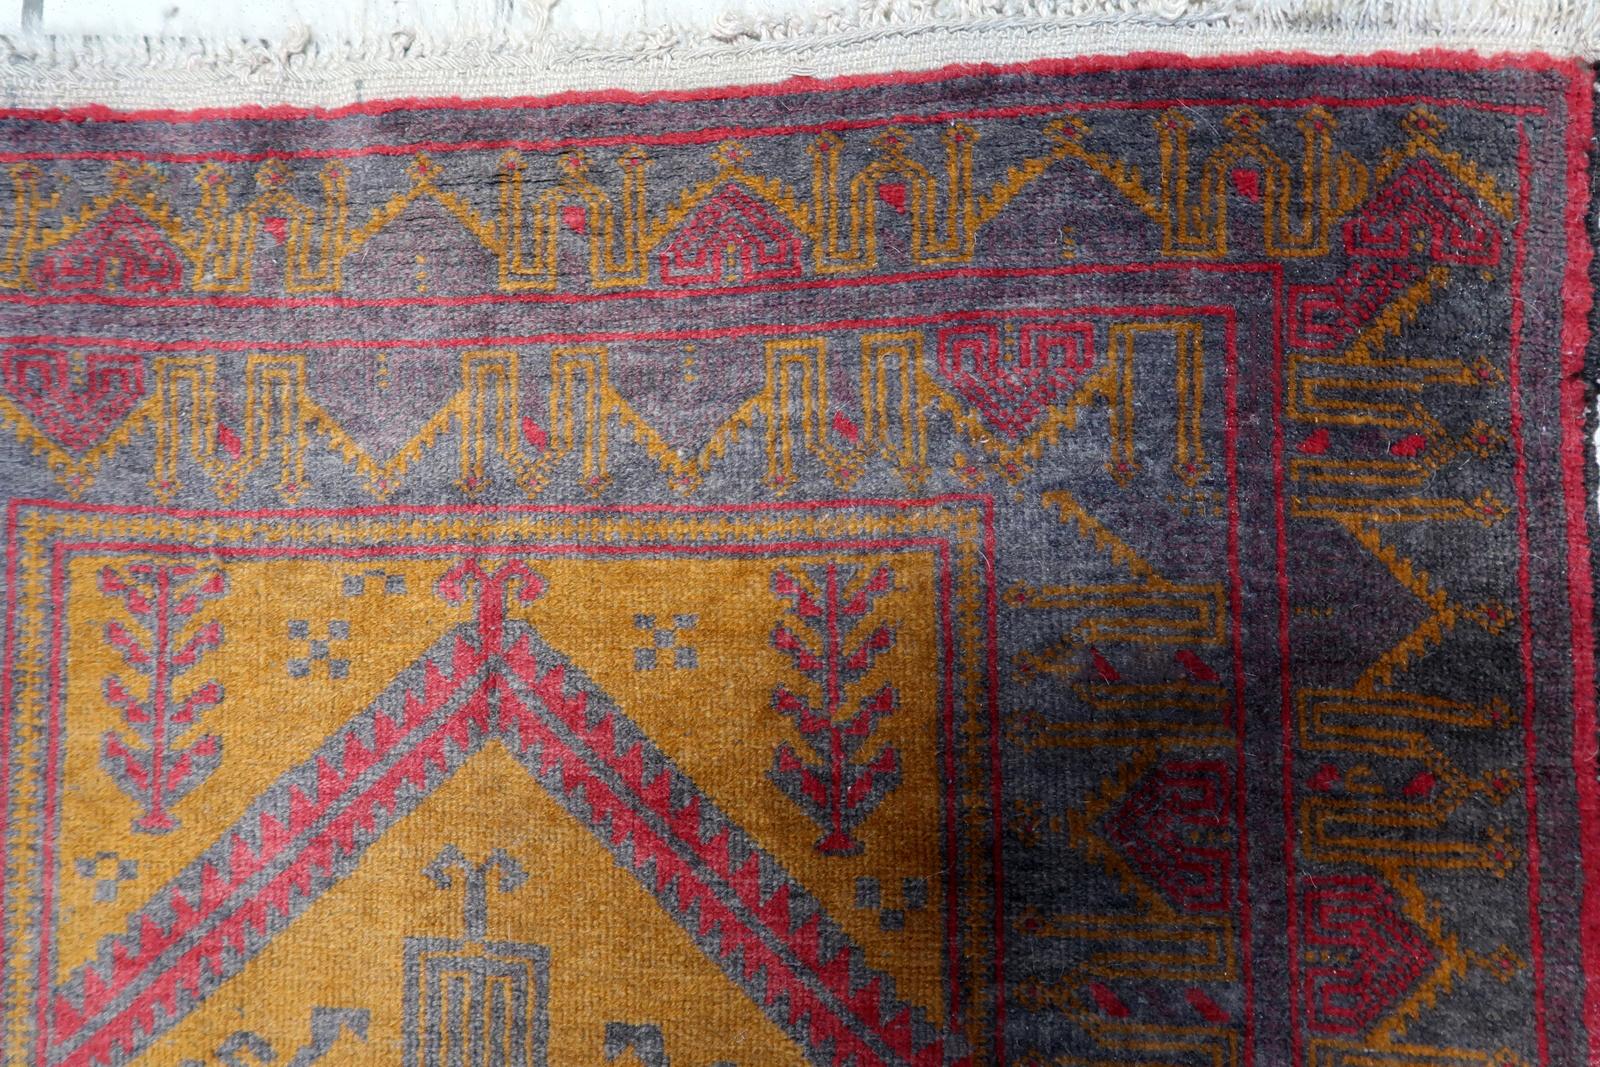 Introducing our captivating Handmade Vintage Afghan Baluch Rug from the 1950s. This exquisite rug showcases a traditional Baluch style with a unique blend of fuchsia, orange, and greyish purple background colors, adding vibrancy and warmth to any